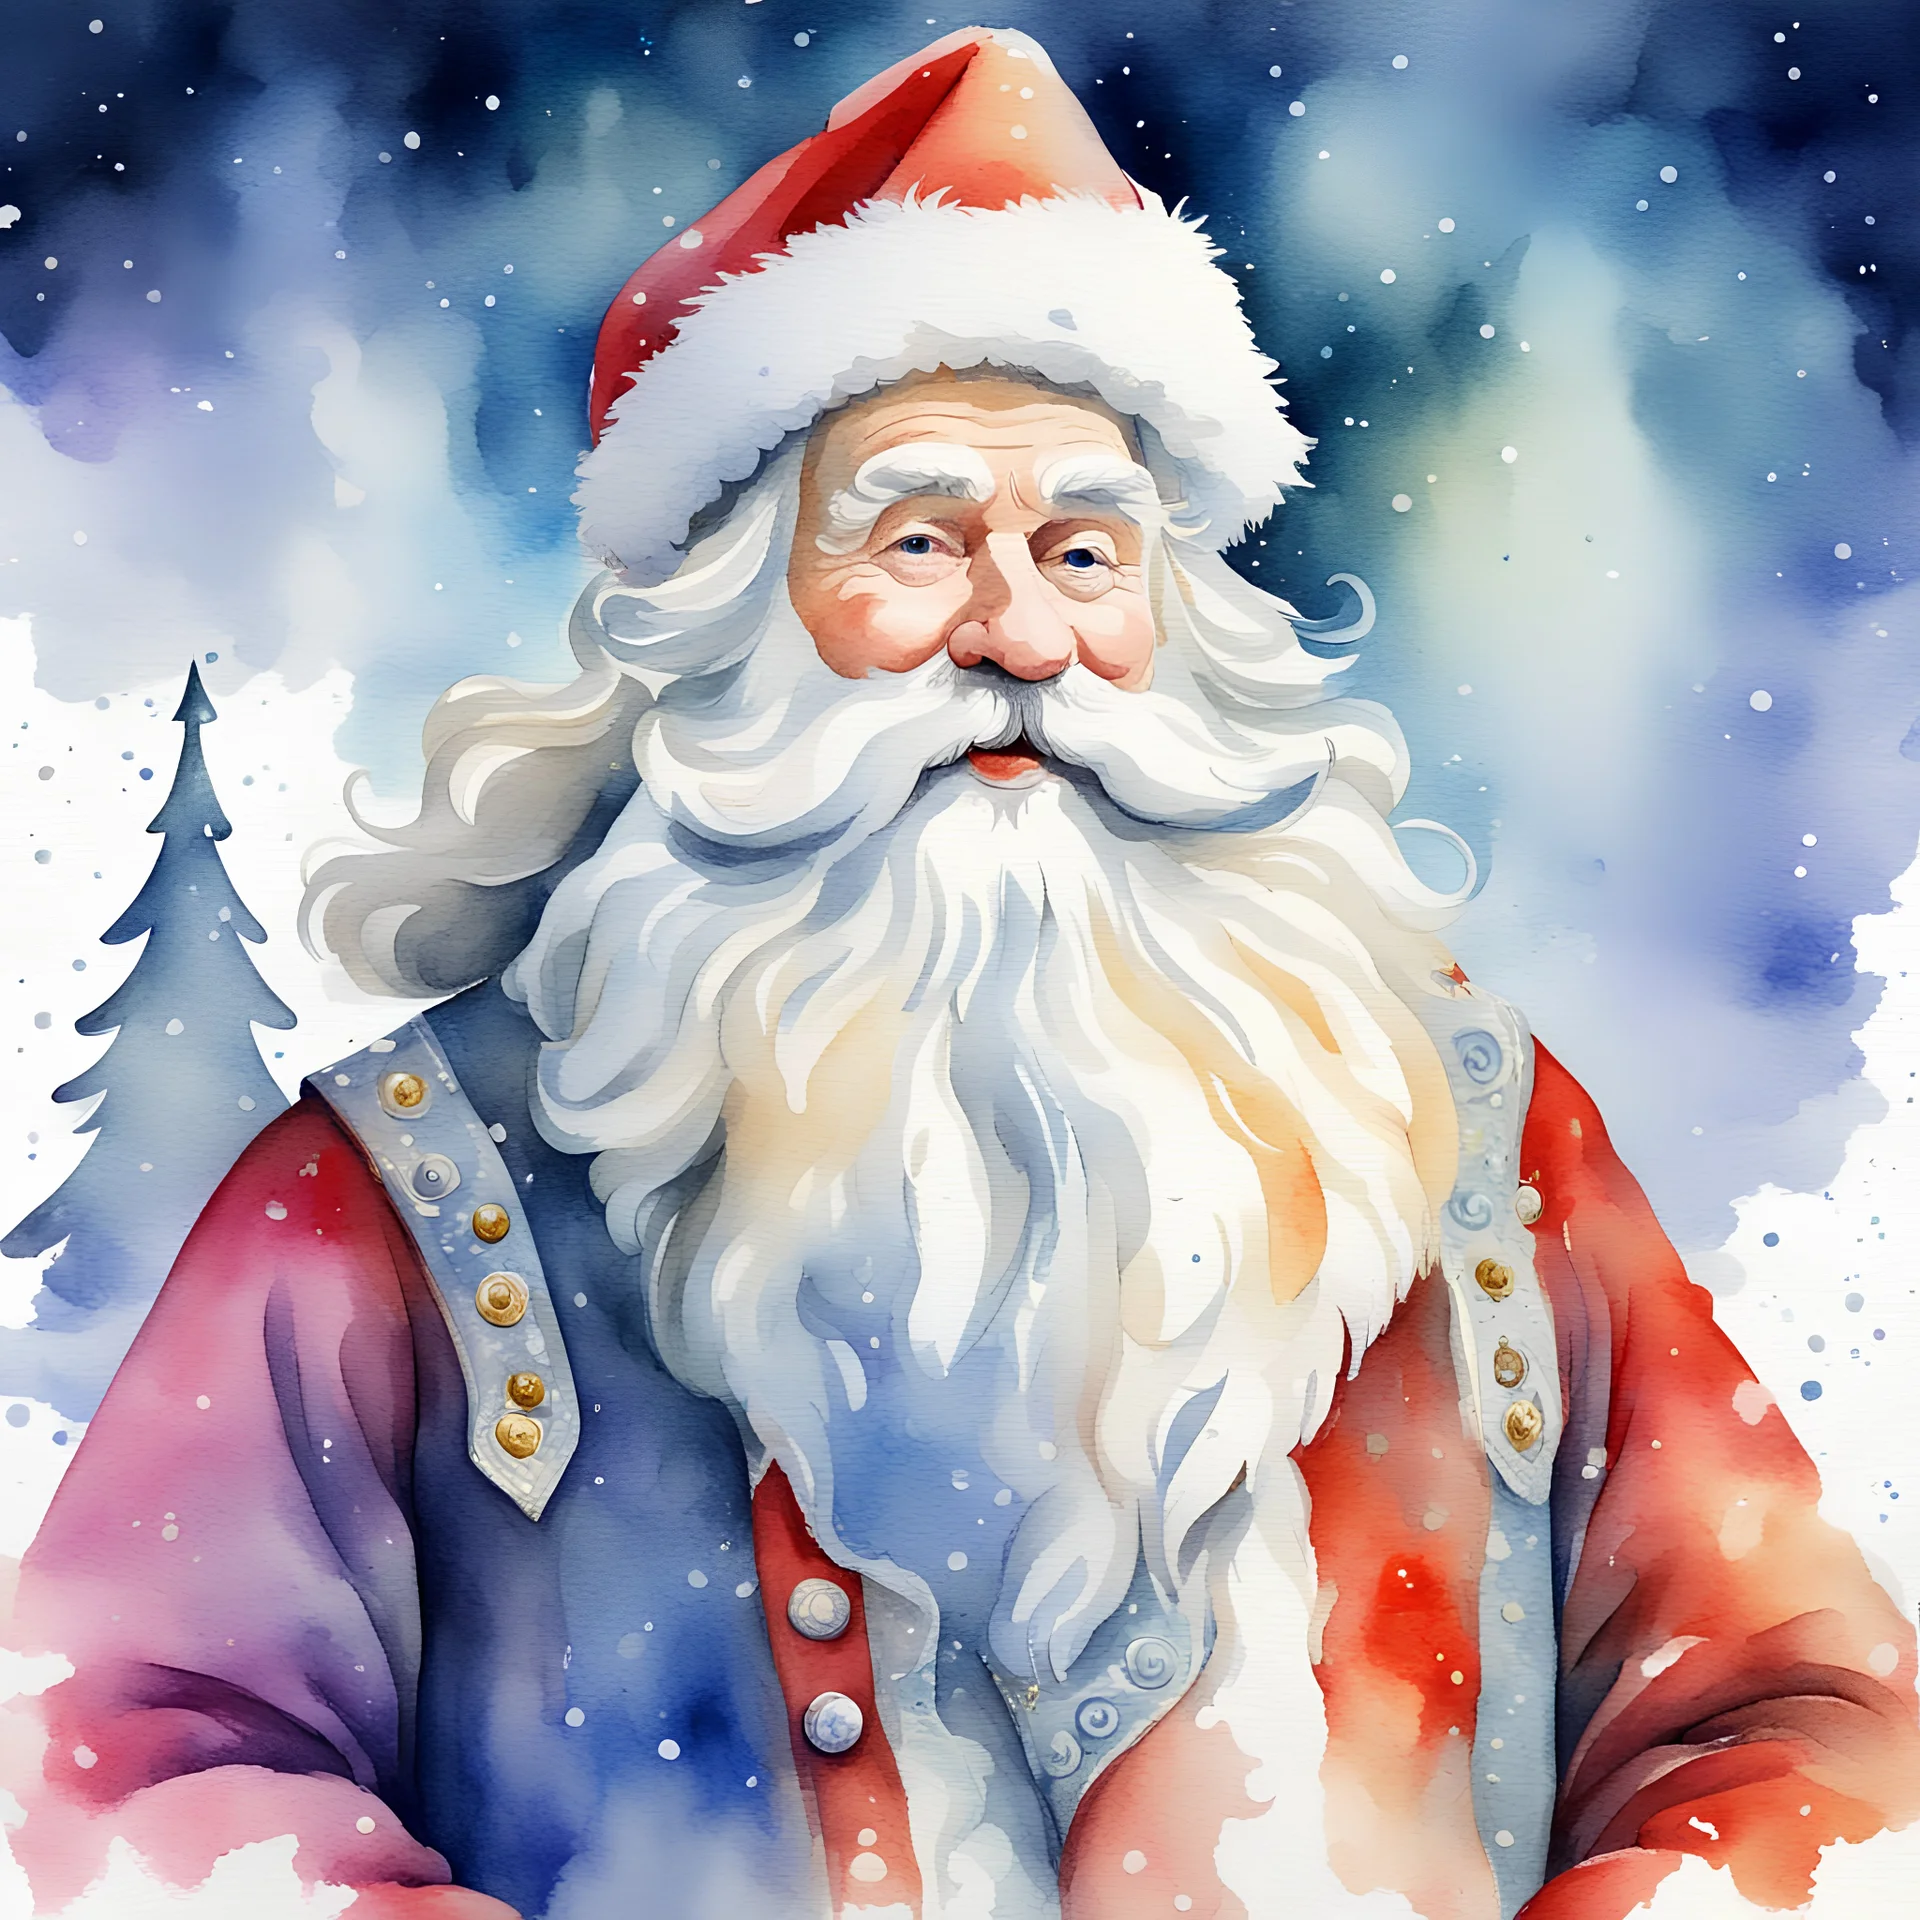 Ded Moroz in watercolor painting pattern art style